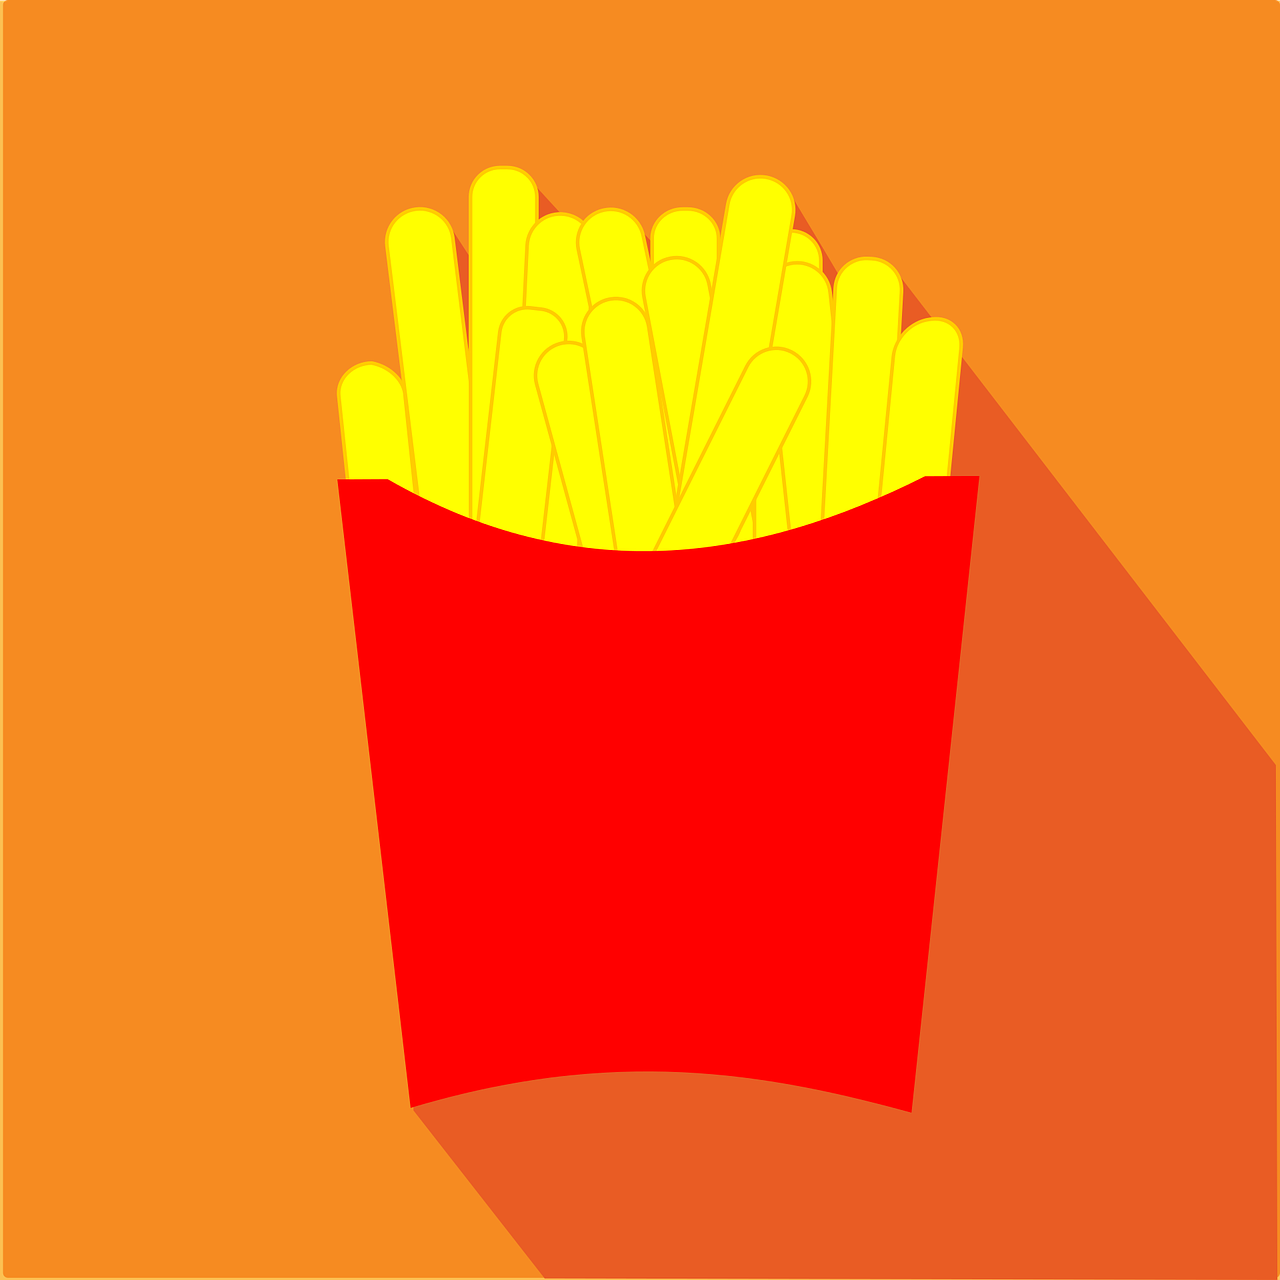 a bunch of french fries in a red box, a screenshot, inspired by Pia Fries, shutterstock, pop art, flat style, siluette, big macs, amber